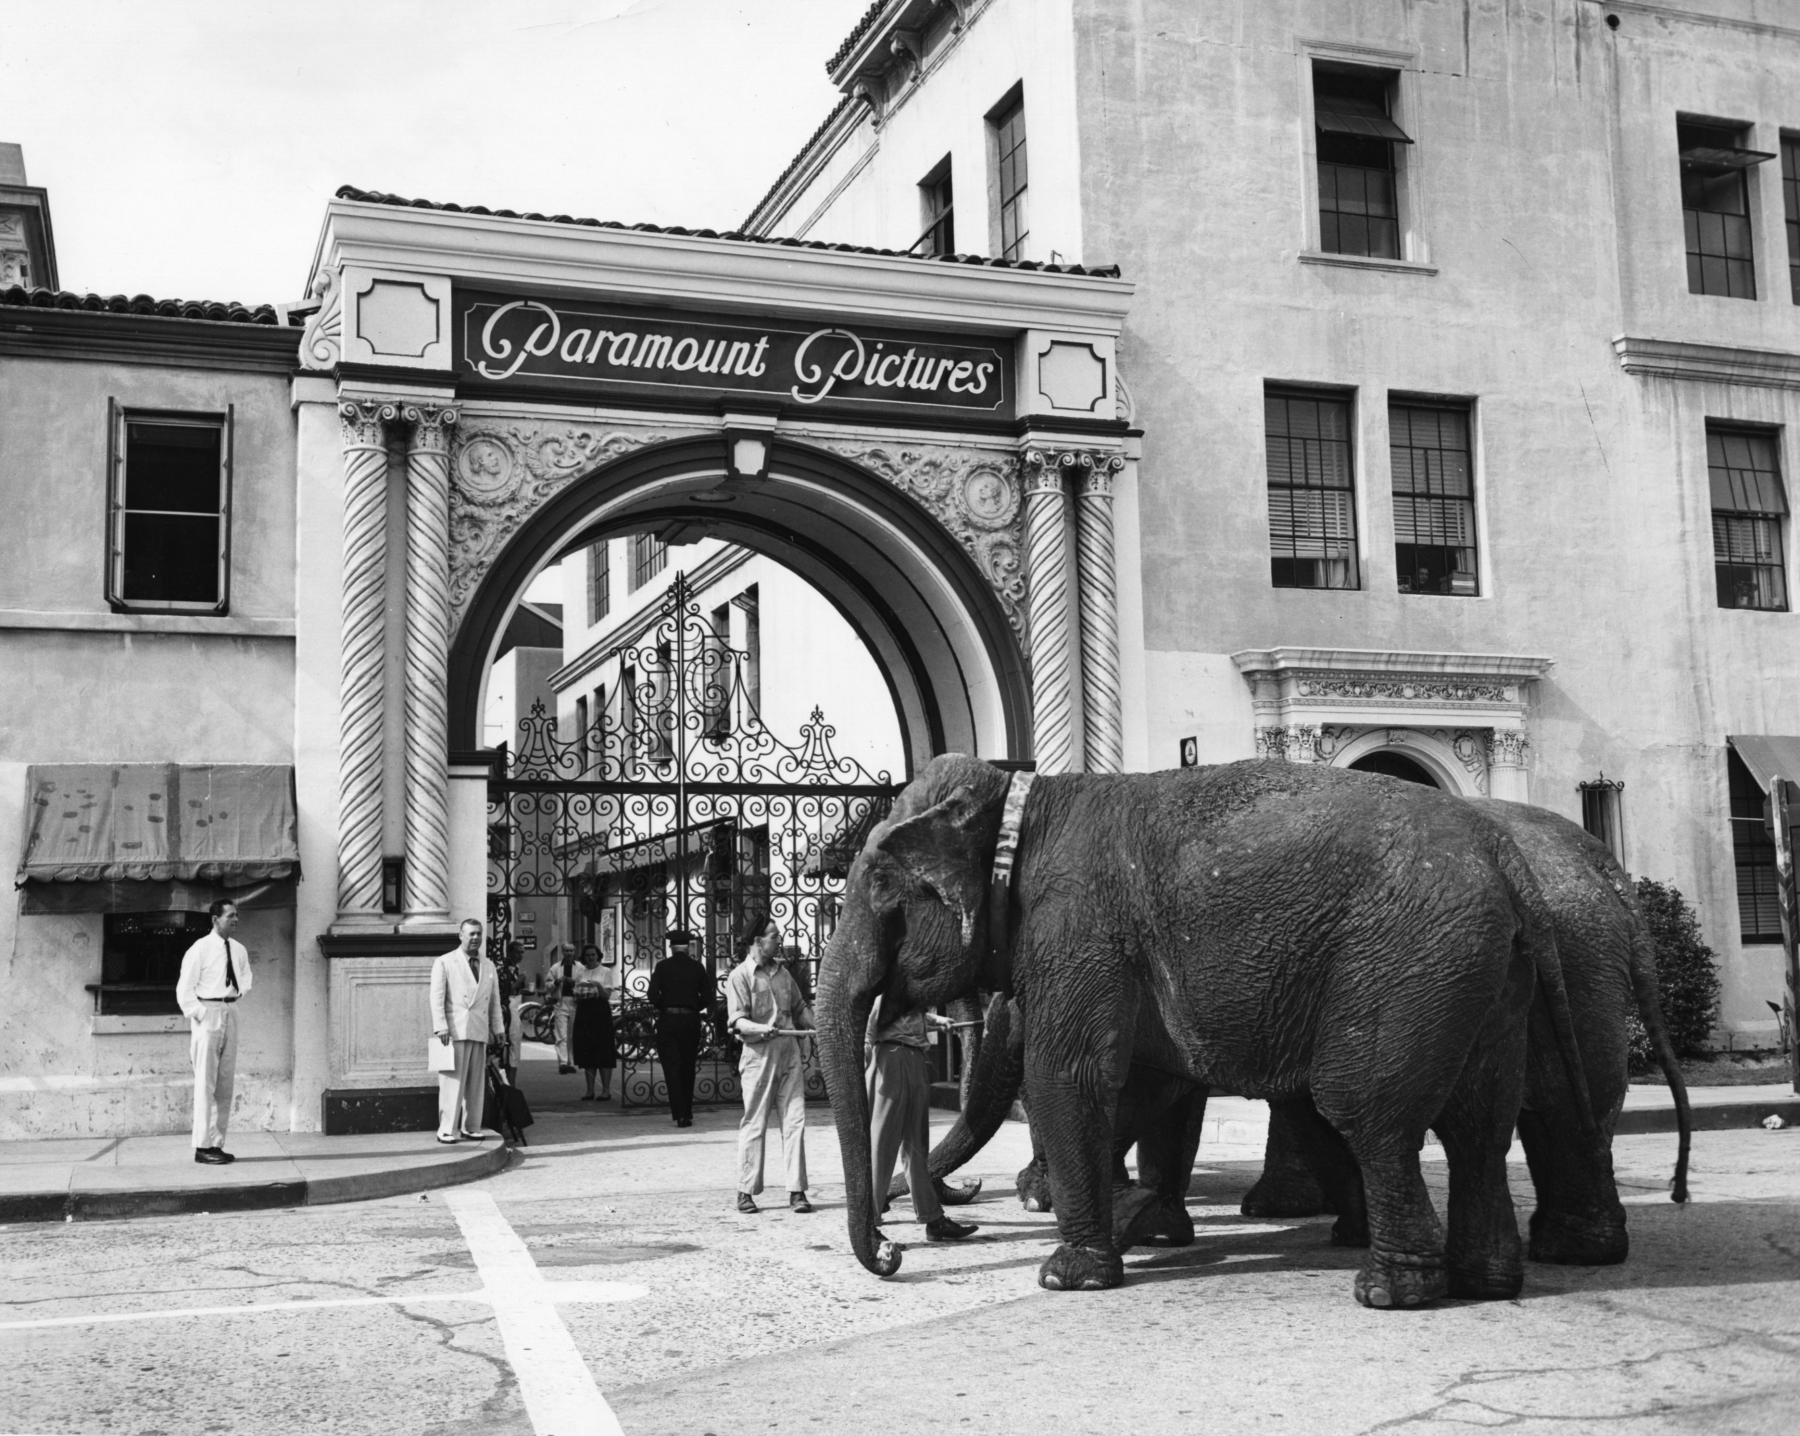 Elephants in front of studio gate of Paramount Pictures, Inc. located in Hollywood, Los Angeles, California, undated. Courtesy Margaret Herrick Library, Academy of Motion Picture Arts and Sciences.